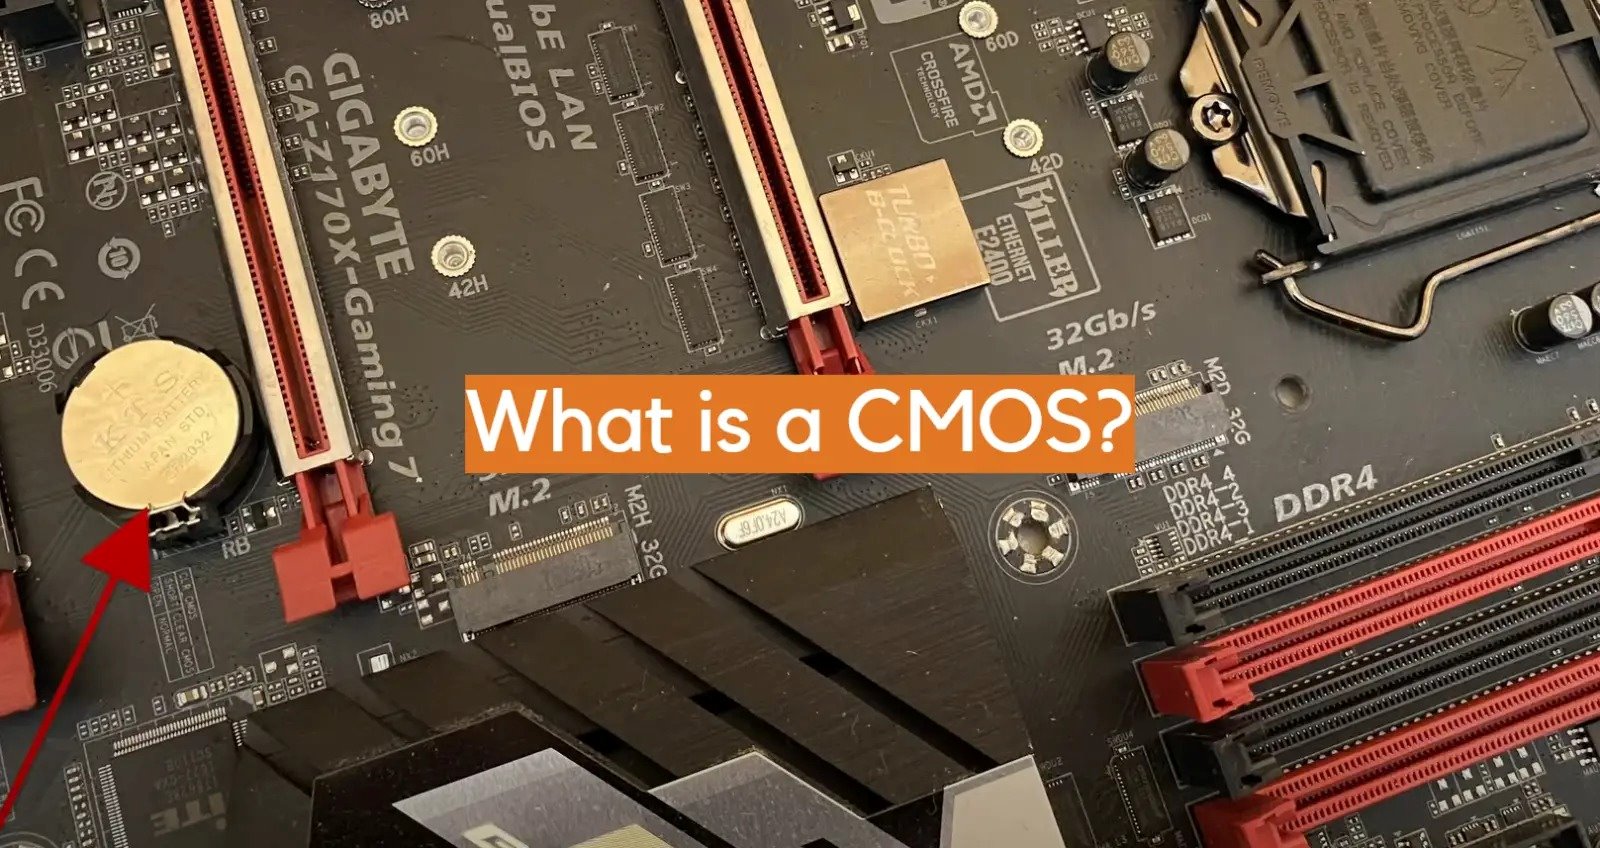 CMOS: What It Is And What It’s For